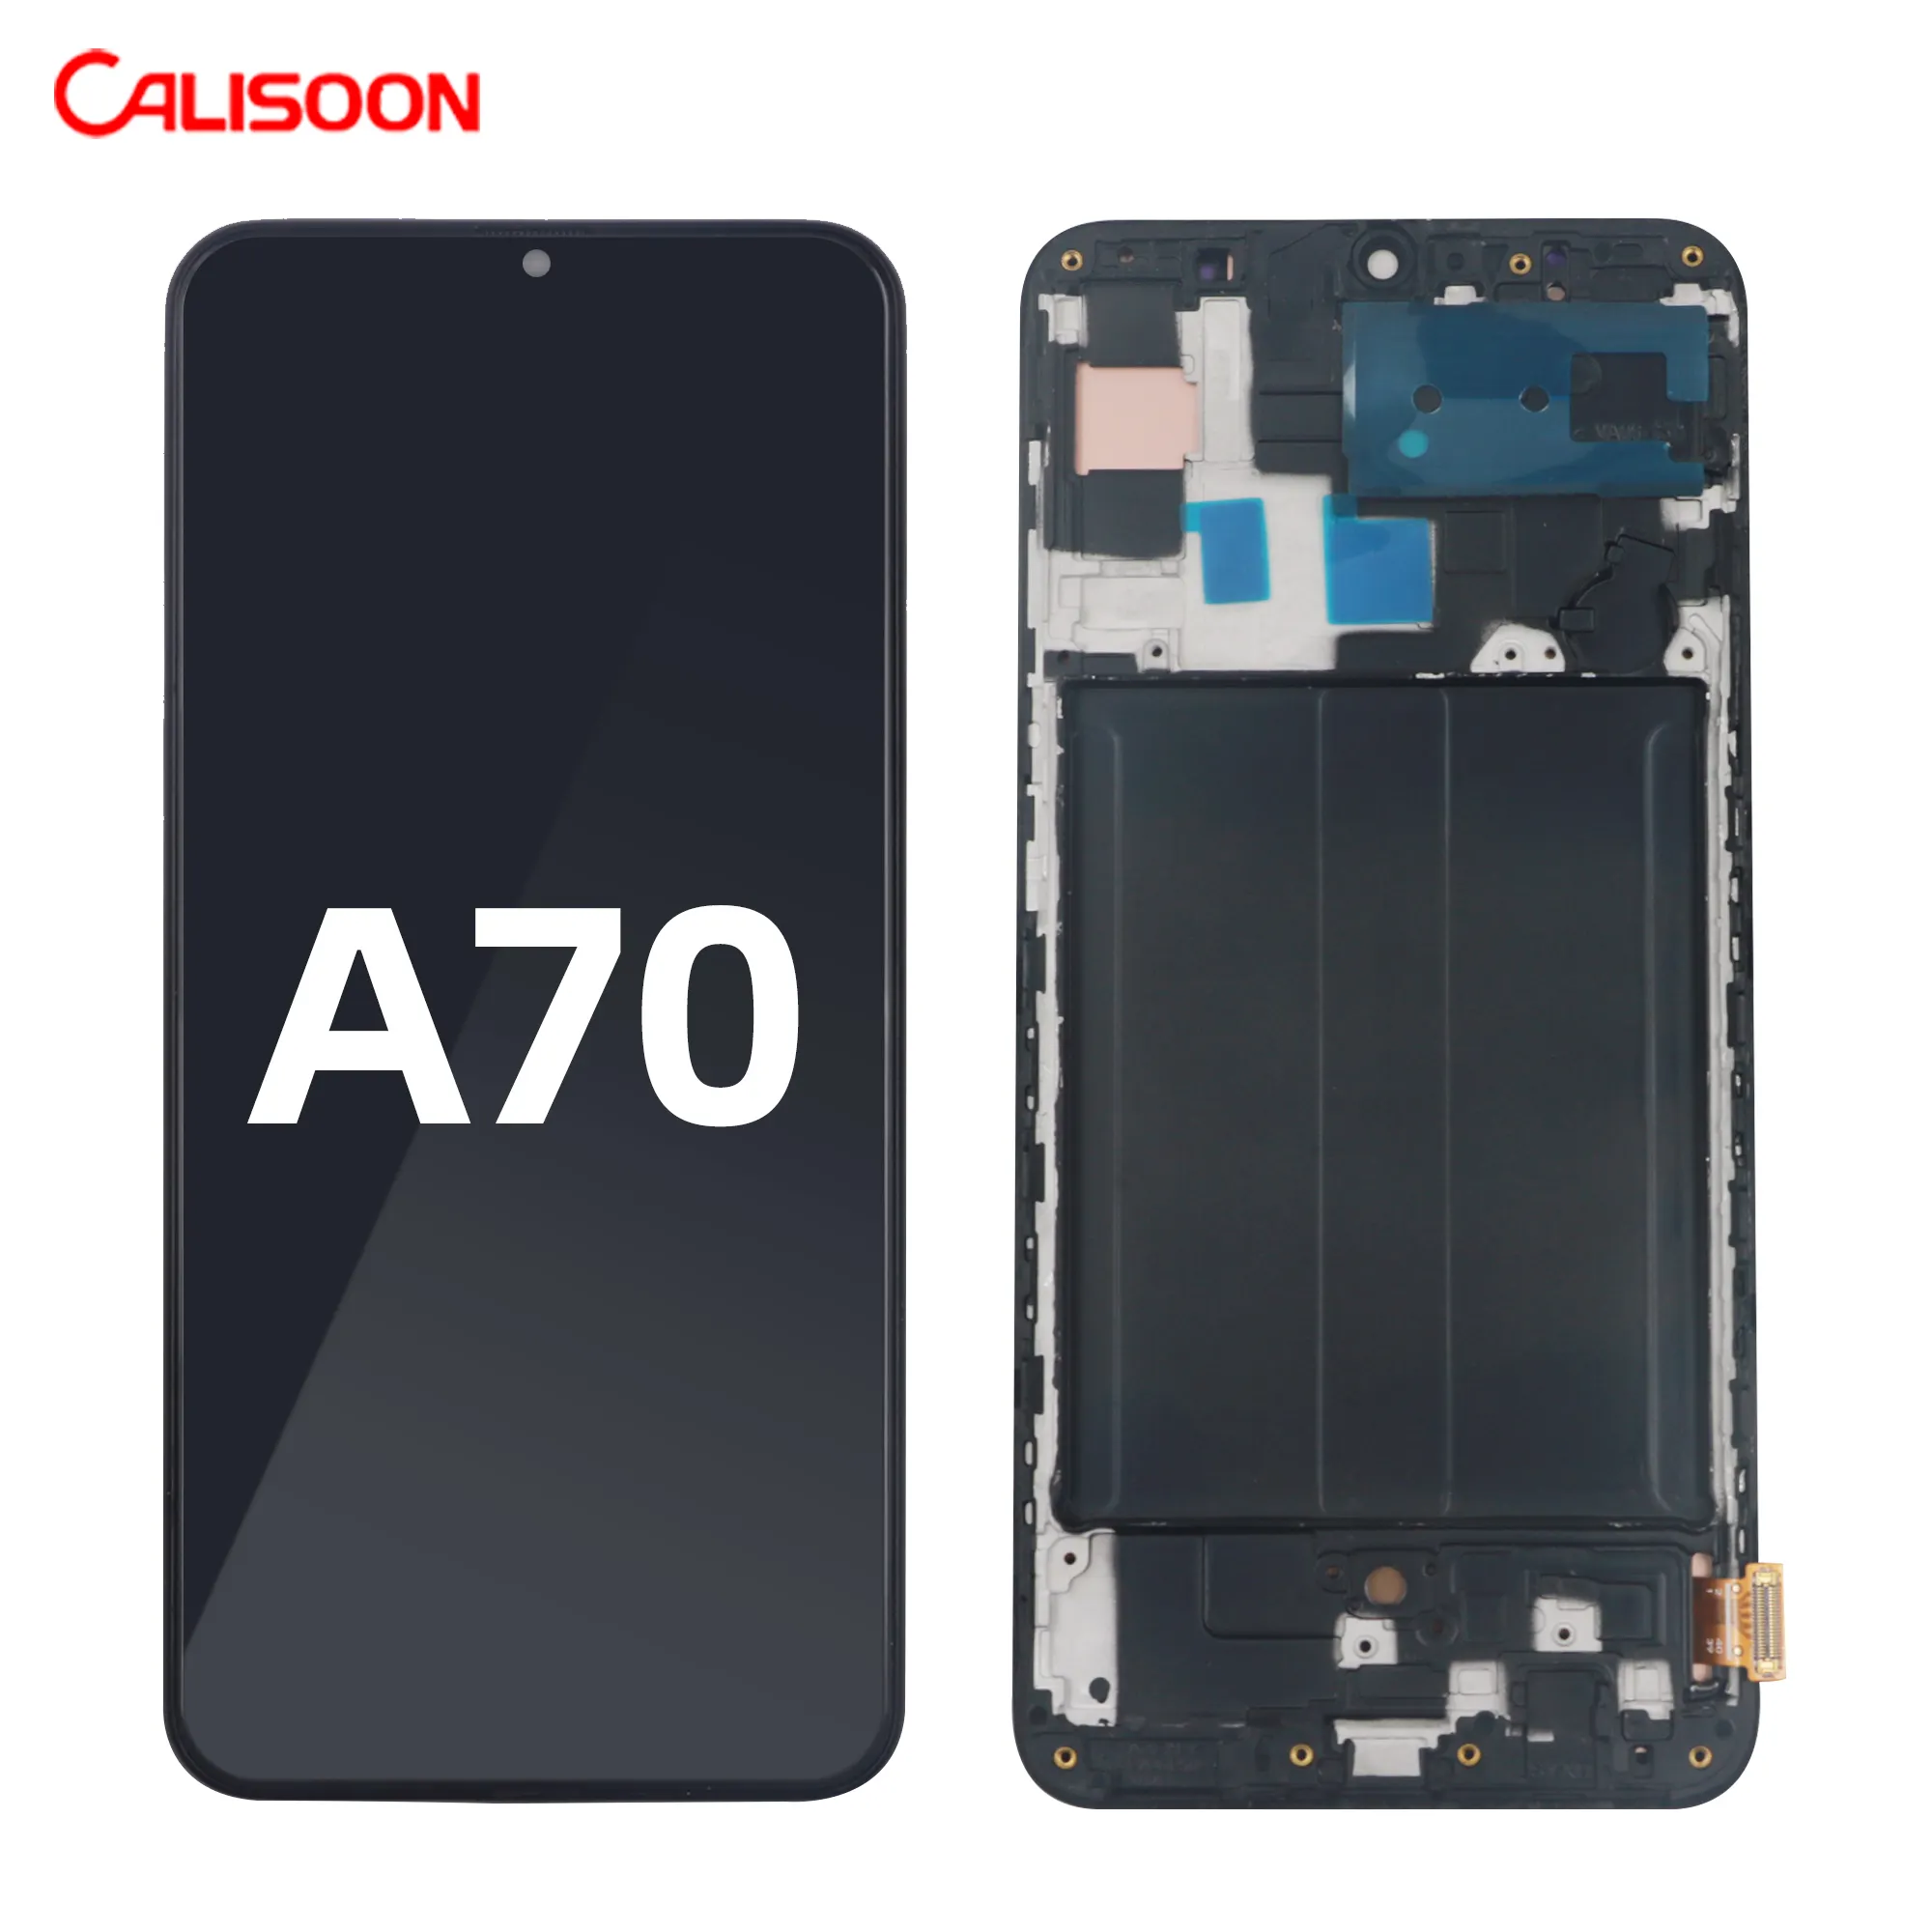 China supplier good price mobile phone lcd screen for samsung galaxy a70 original oled amoled replacement